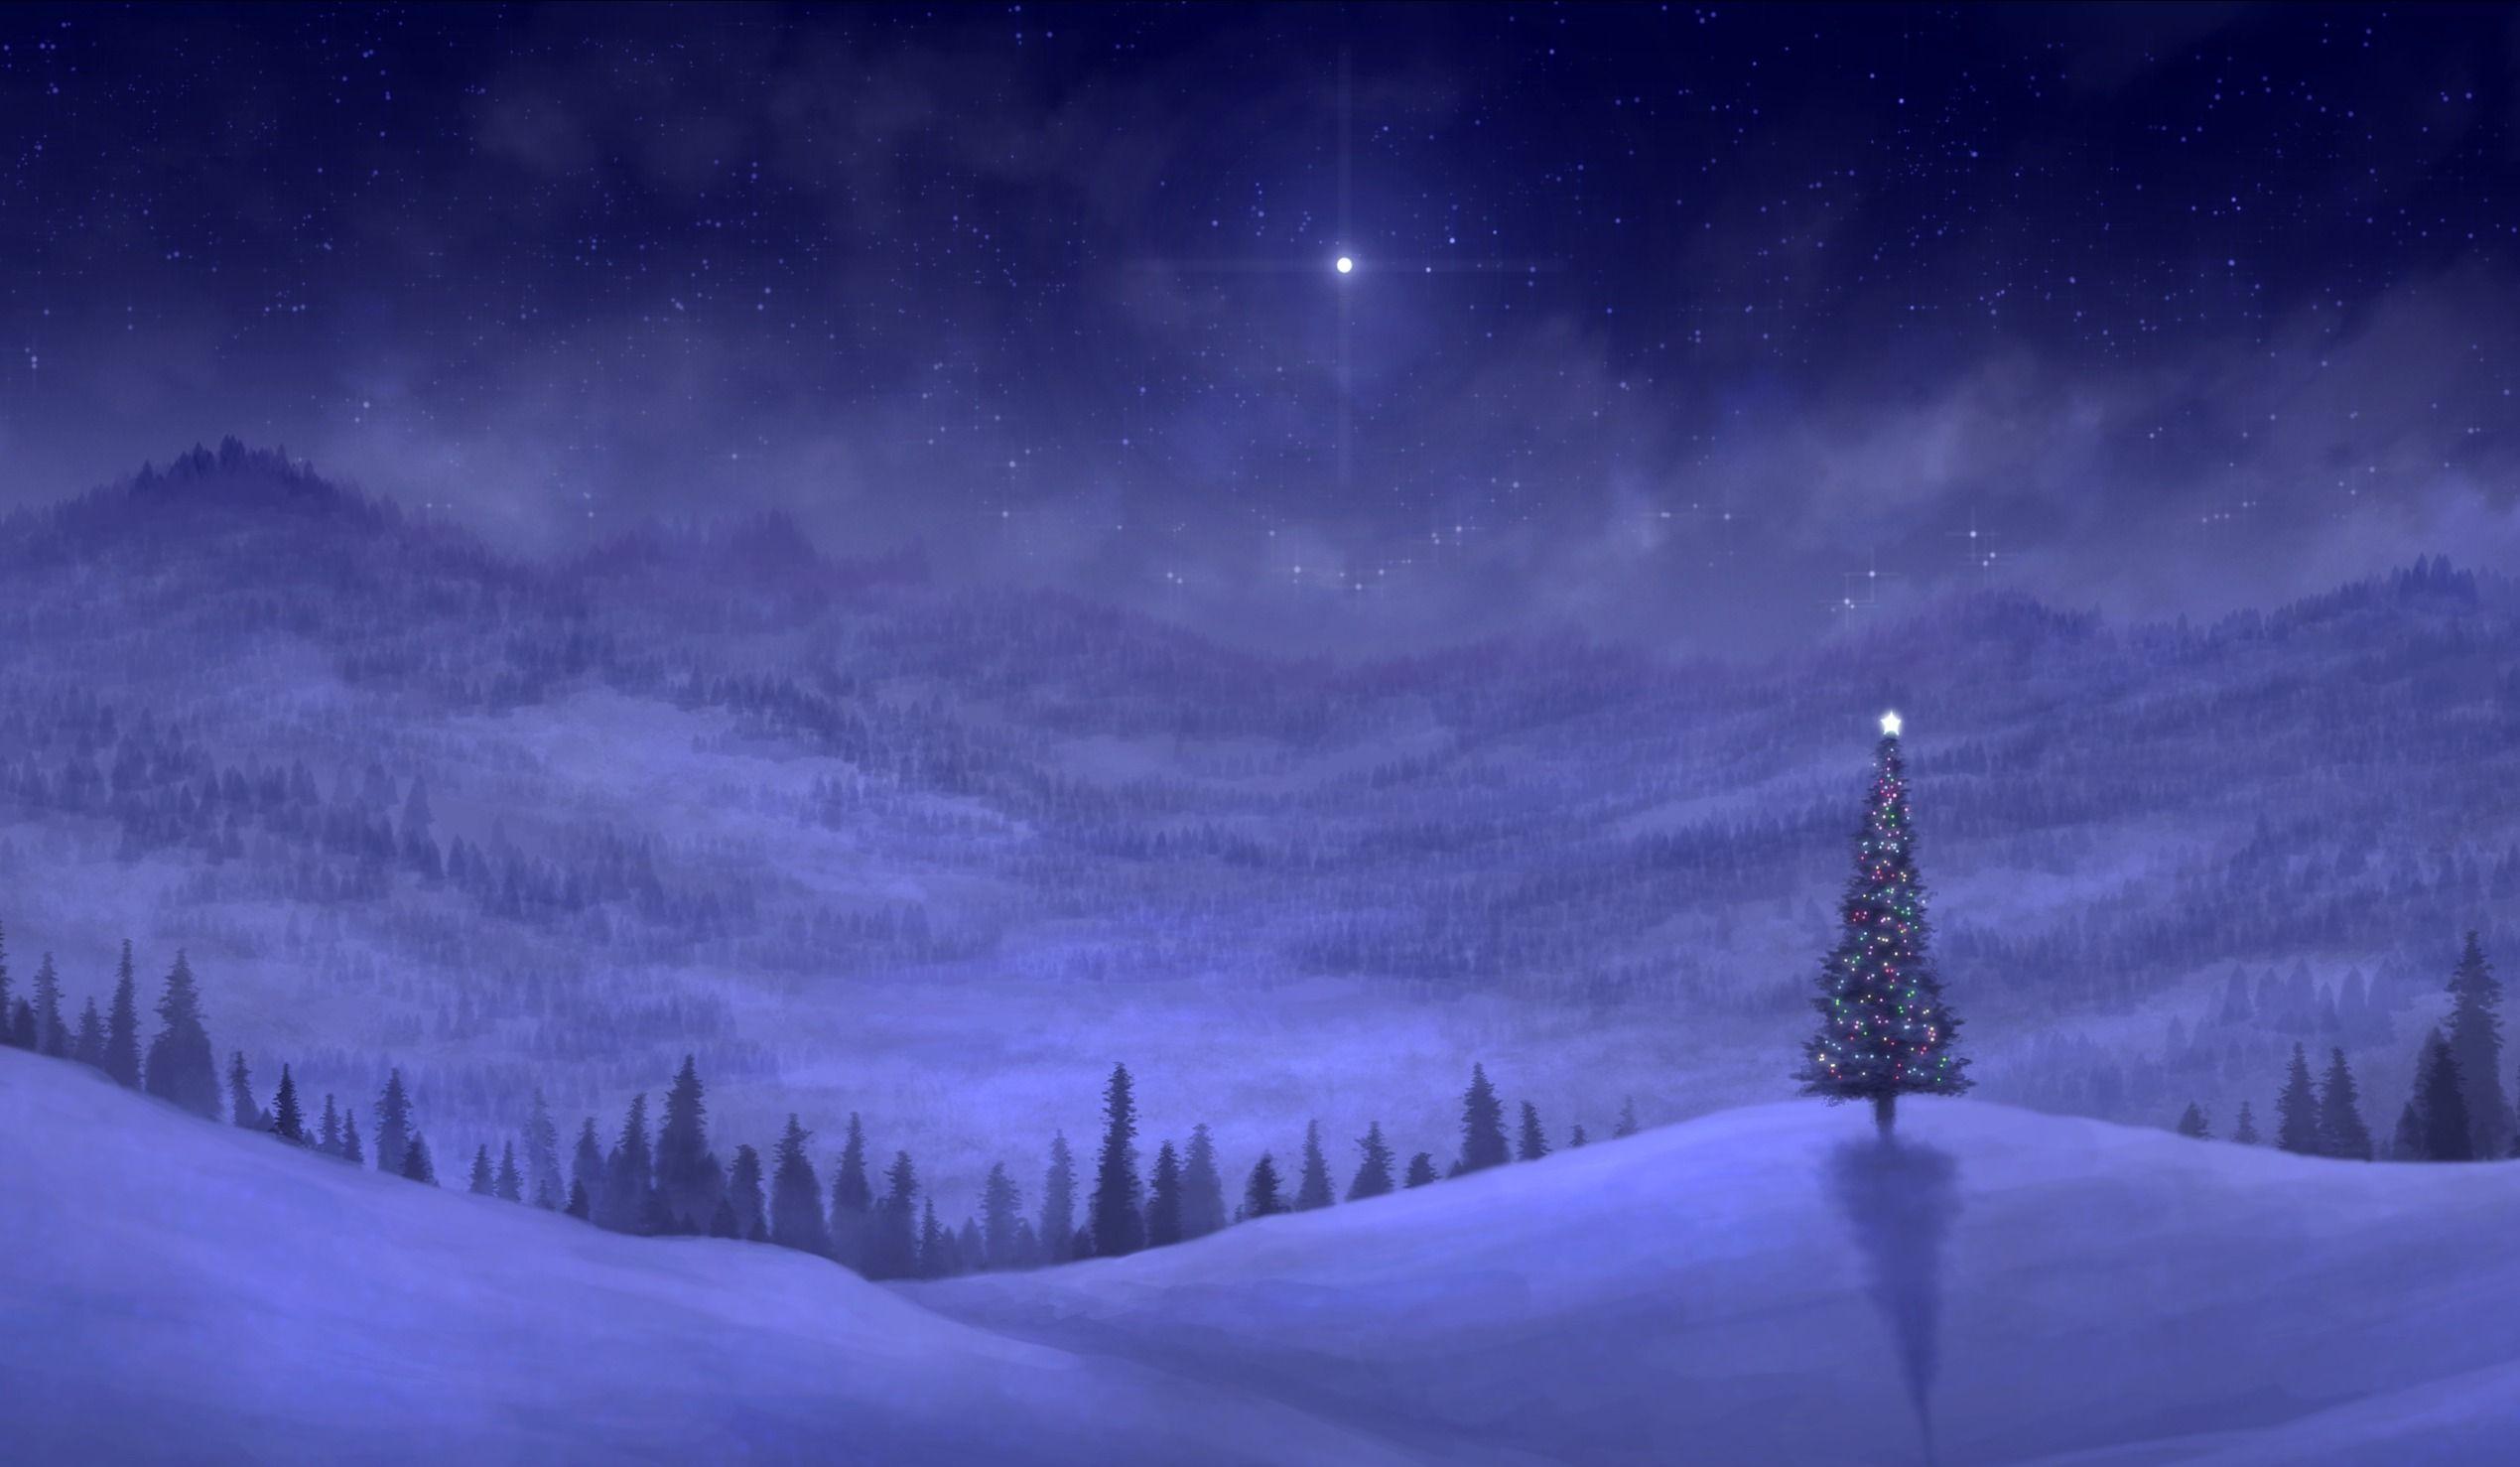 The Christmas tree in the light of the moon wallpaper and image